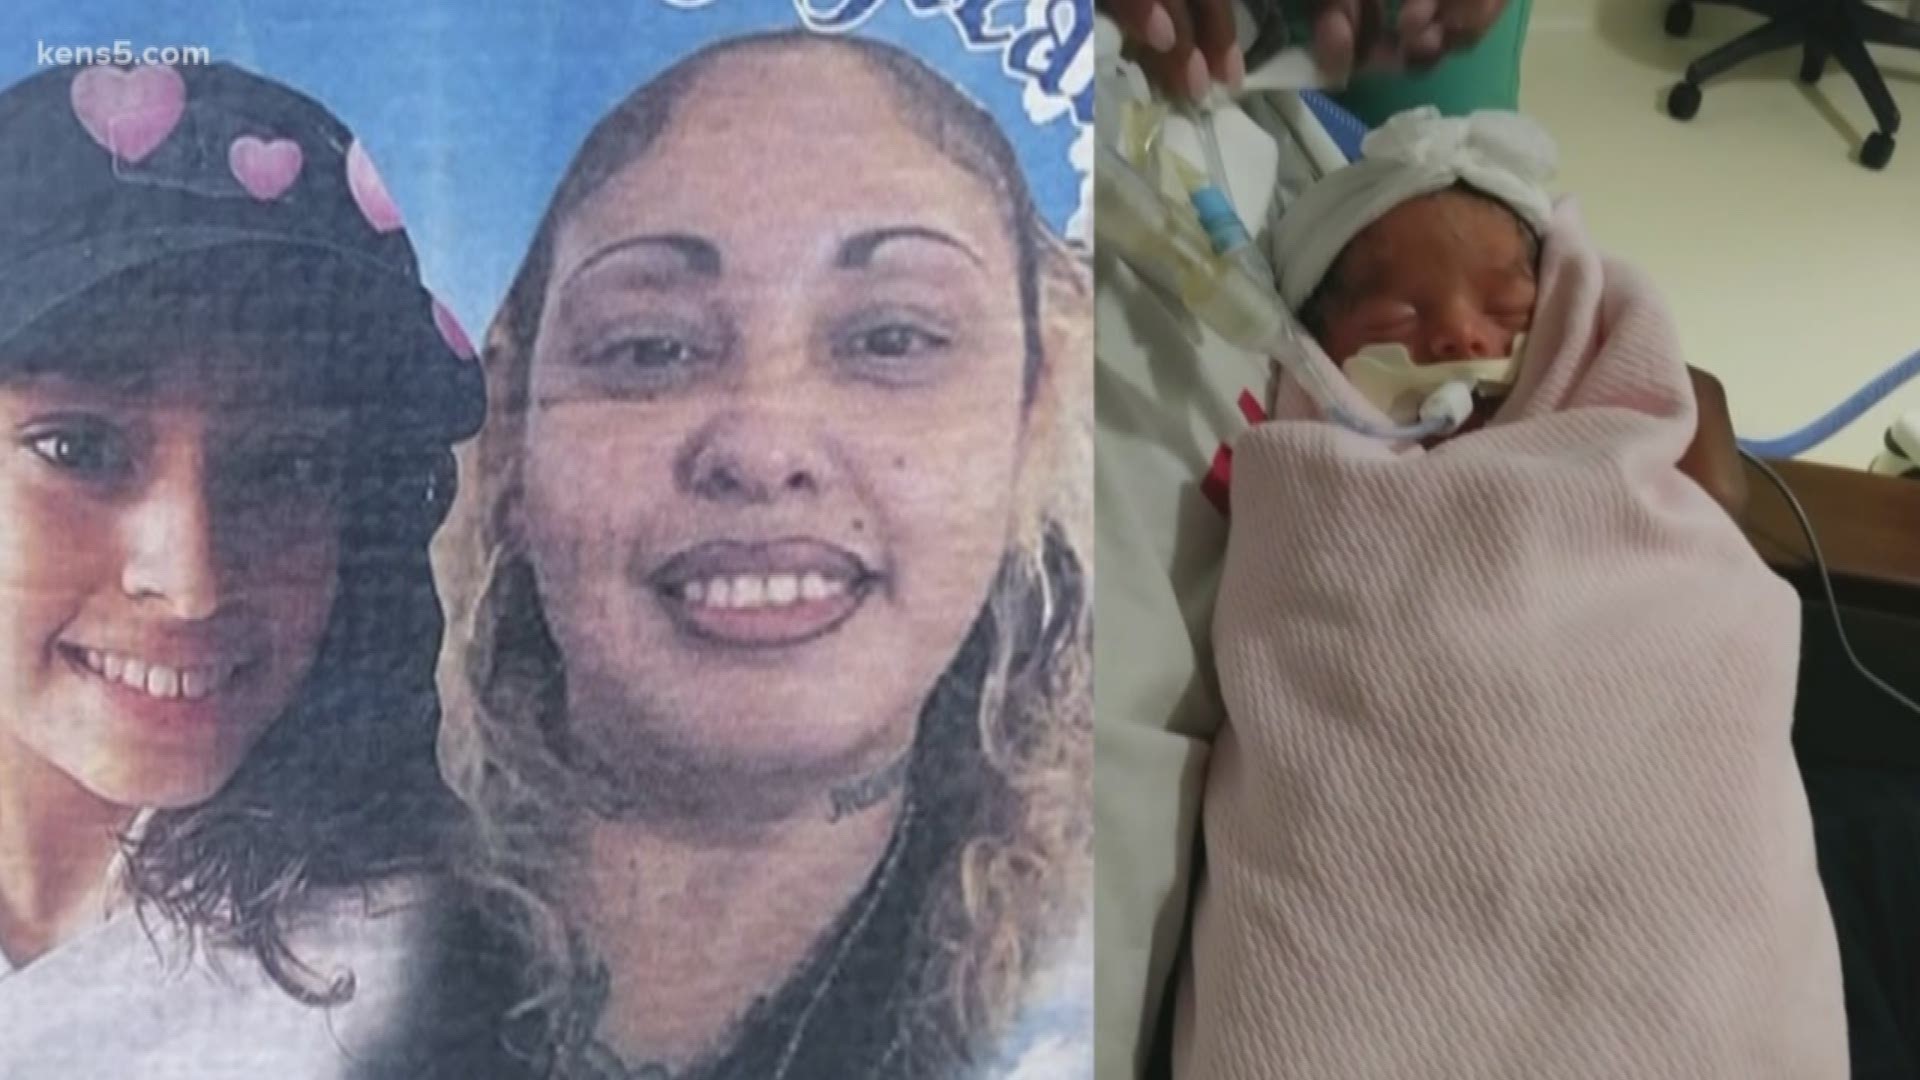 Malinda Quiroz lost three family members in one day. Her daughter Janette and granddaughter Bernadett, who was nearly 8 months pregnant, were shot and killed at a southside apartment complex.